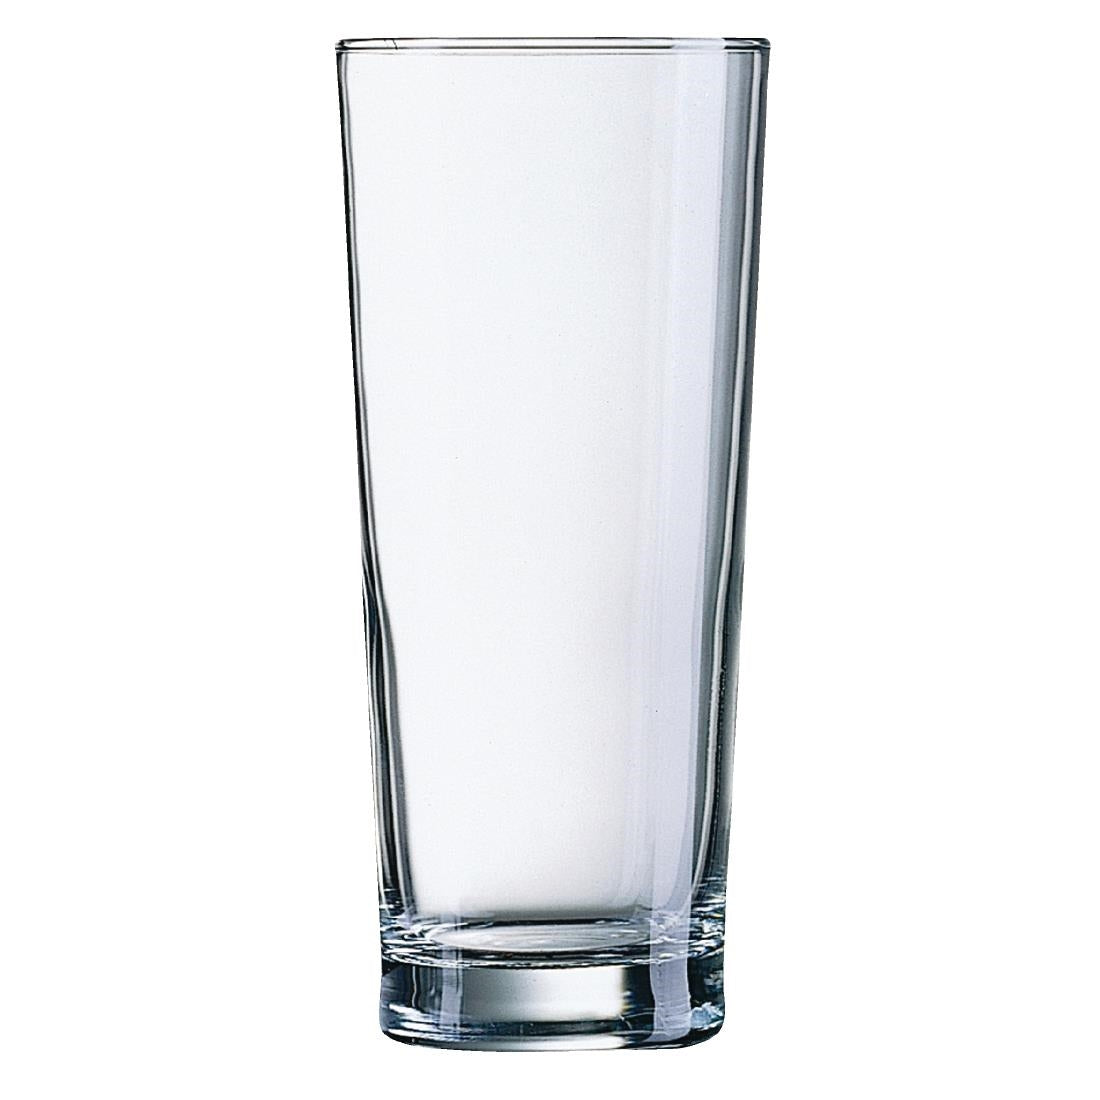 CJ998 Arcoroc Premier Nucleated Hi Ball Glasses 1 Pint 570ml CE Marked (Pack of 12) JD Catering Equipment Solutions Ltd